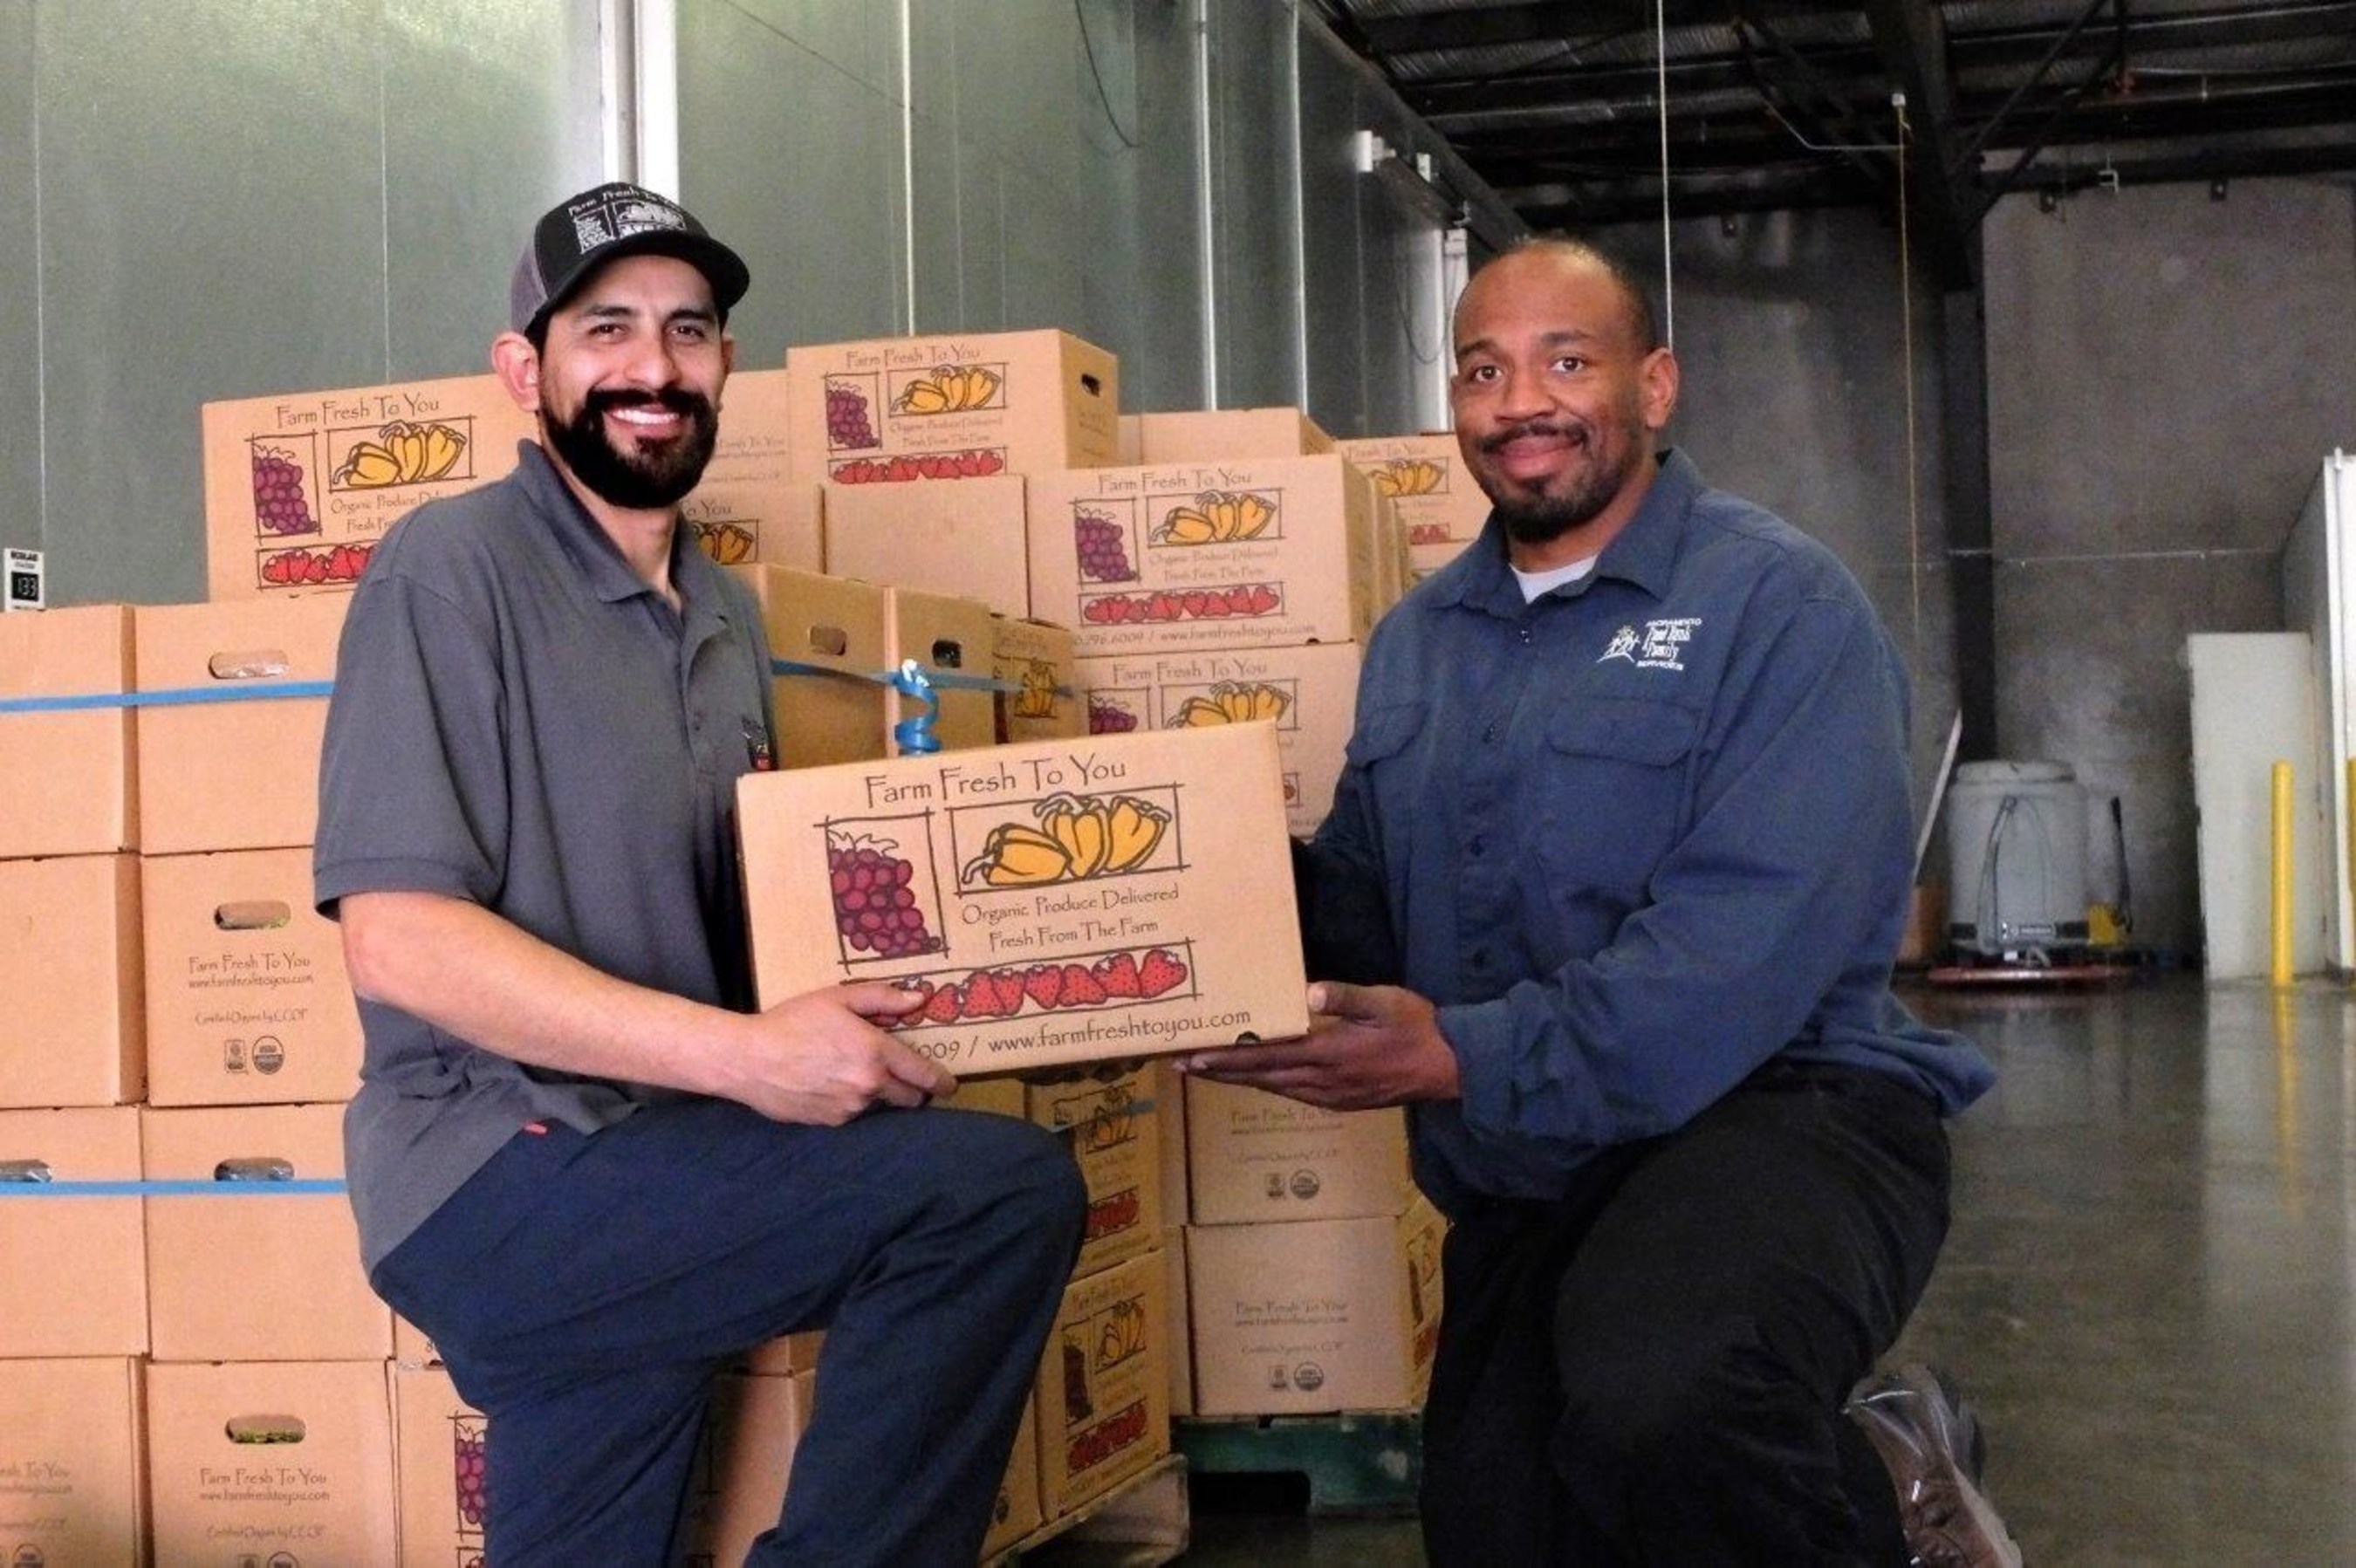 Farm Fresh To You's Donate-A-Box program has donated over 22,000 produced boxes to food banks.